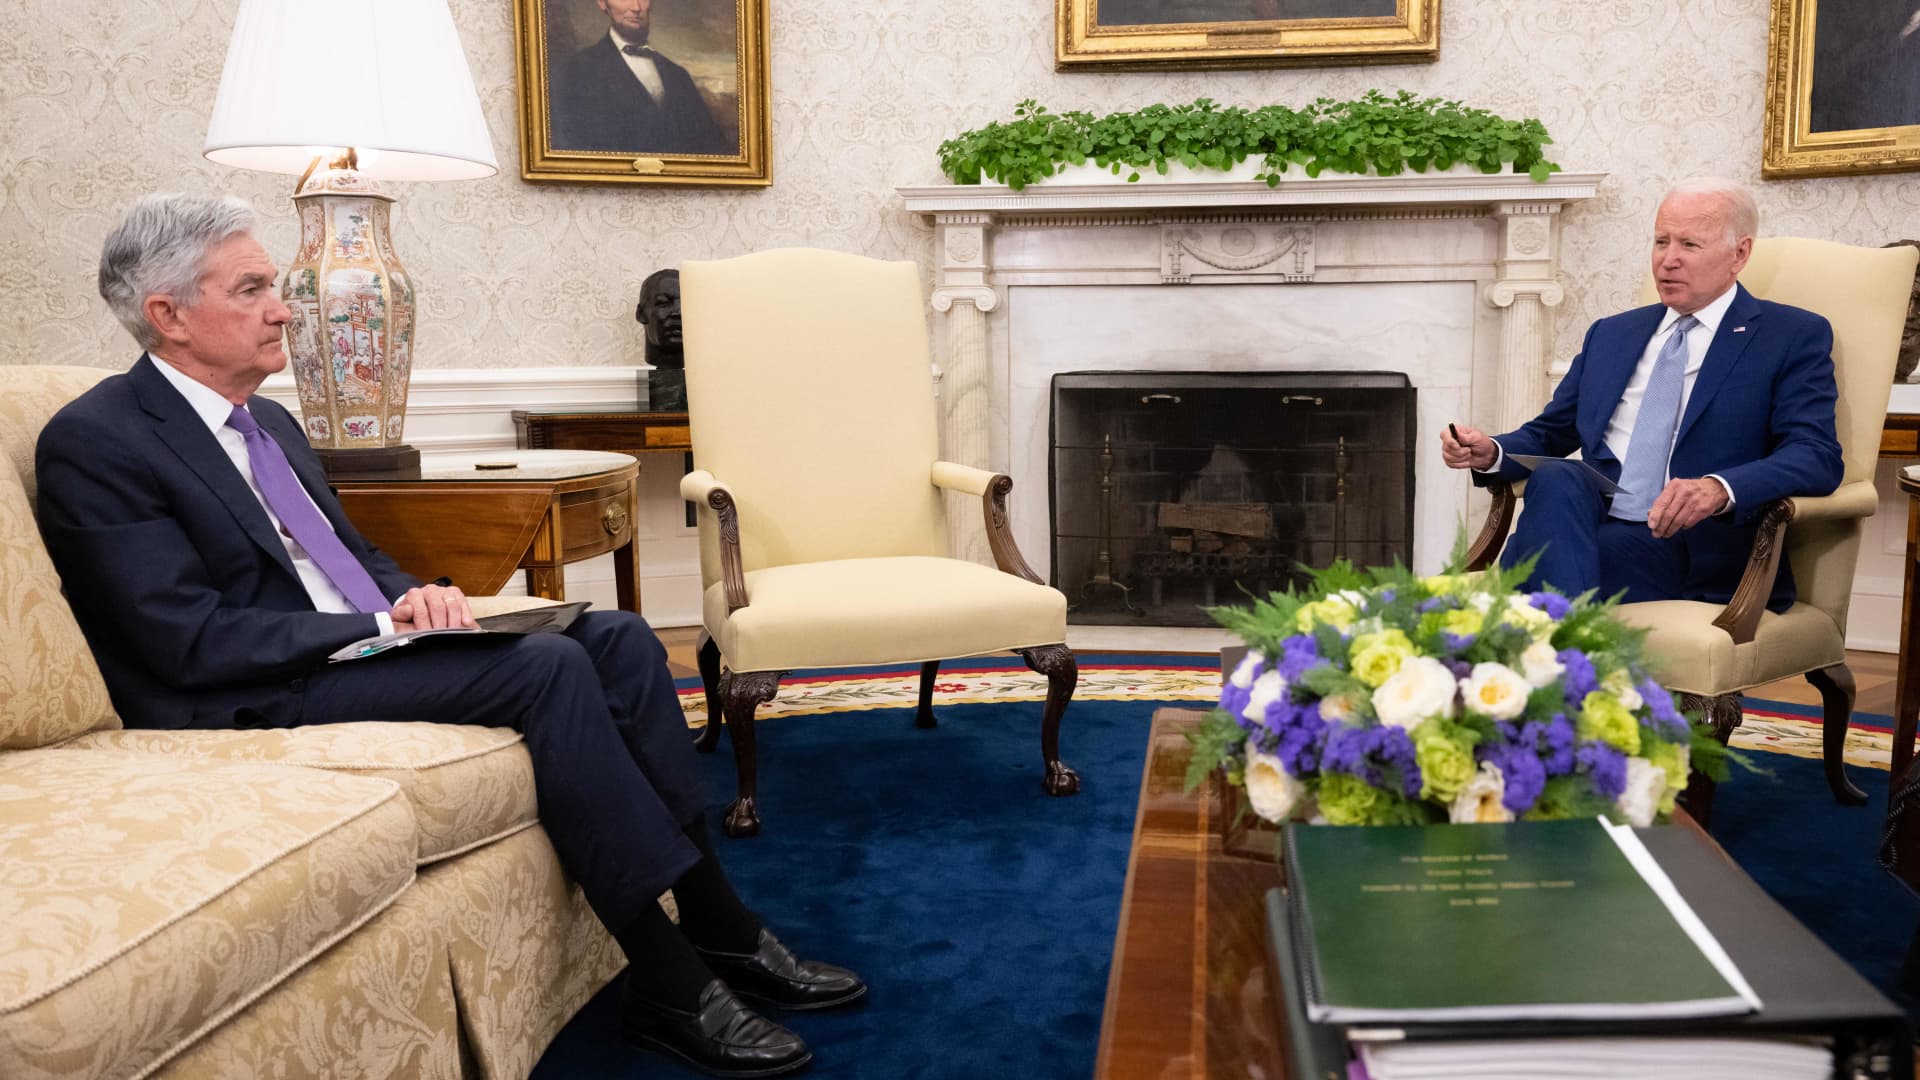 Chairman of the Federal Reserve Jerome Powell (left) meets with President Joe Biden in the Oval Office on May 31, 2022.